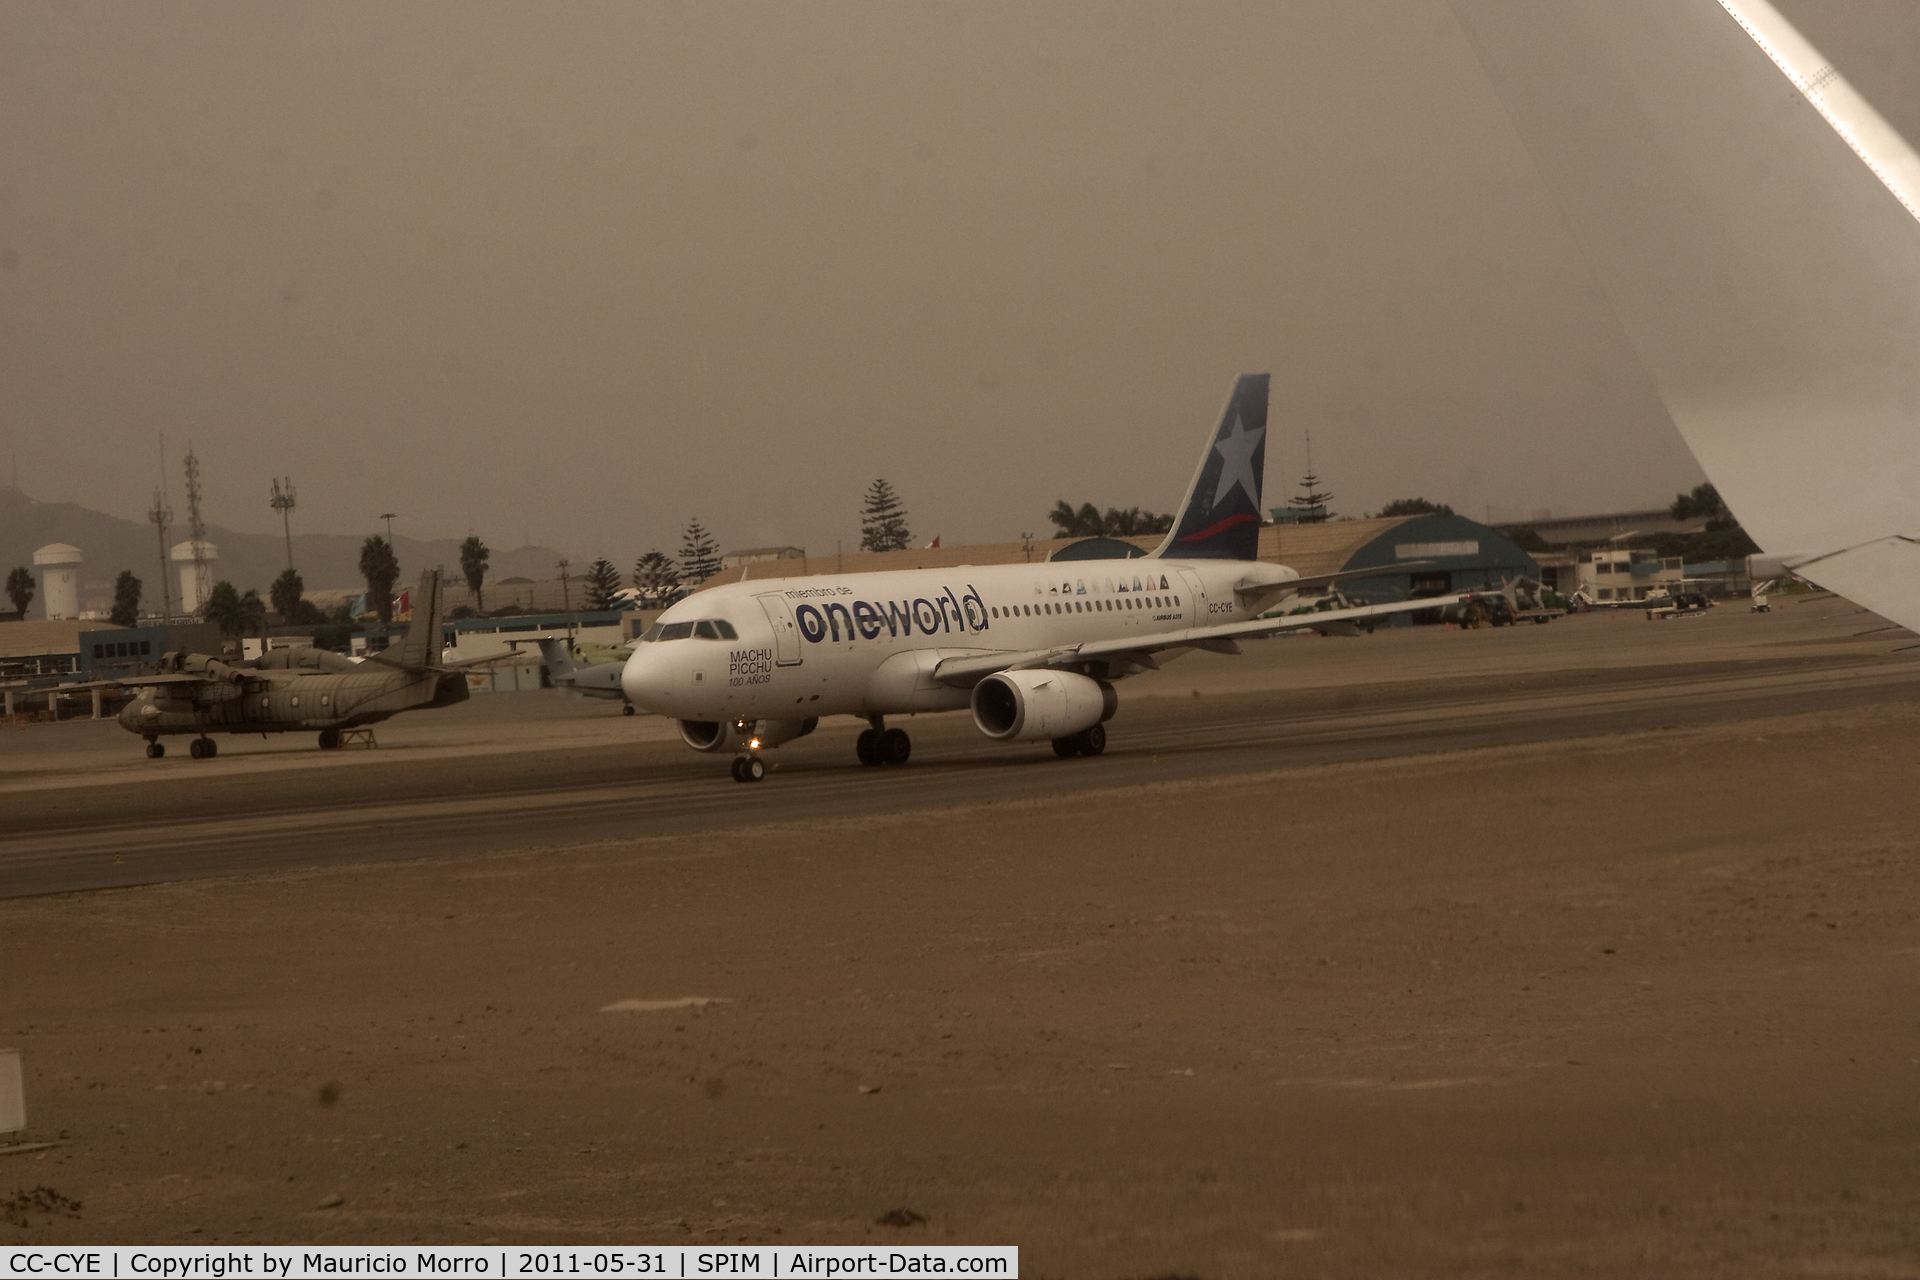 CC-CYE, 2008 Airbus A319-132 C/N 3663, Airbus 319 taxiing at Jorge Chavez (note the emblems of the at the time 10 members of the One World Alliance (2009))